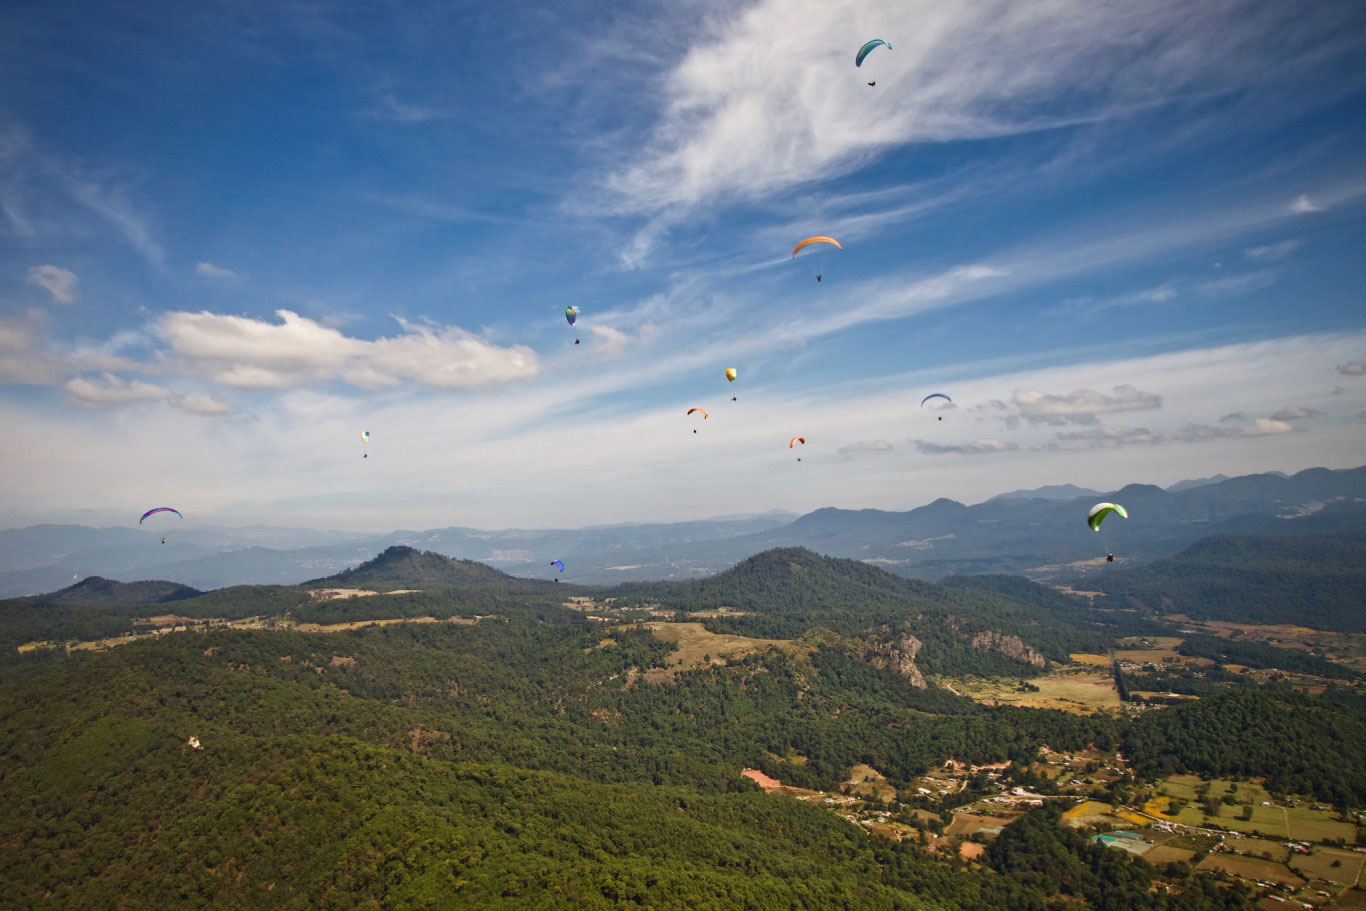 Paraglide-New-England-Trips-Valle-de-Bravo-Mexico-Gallery-Over-Launch.jpg